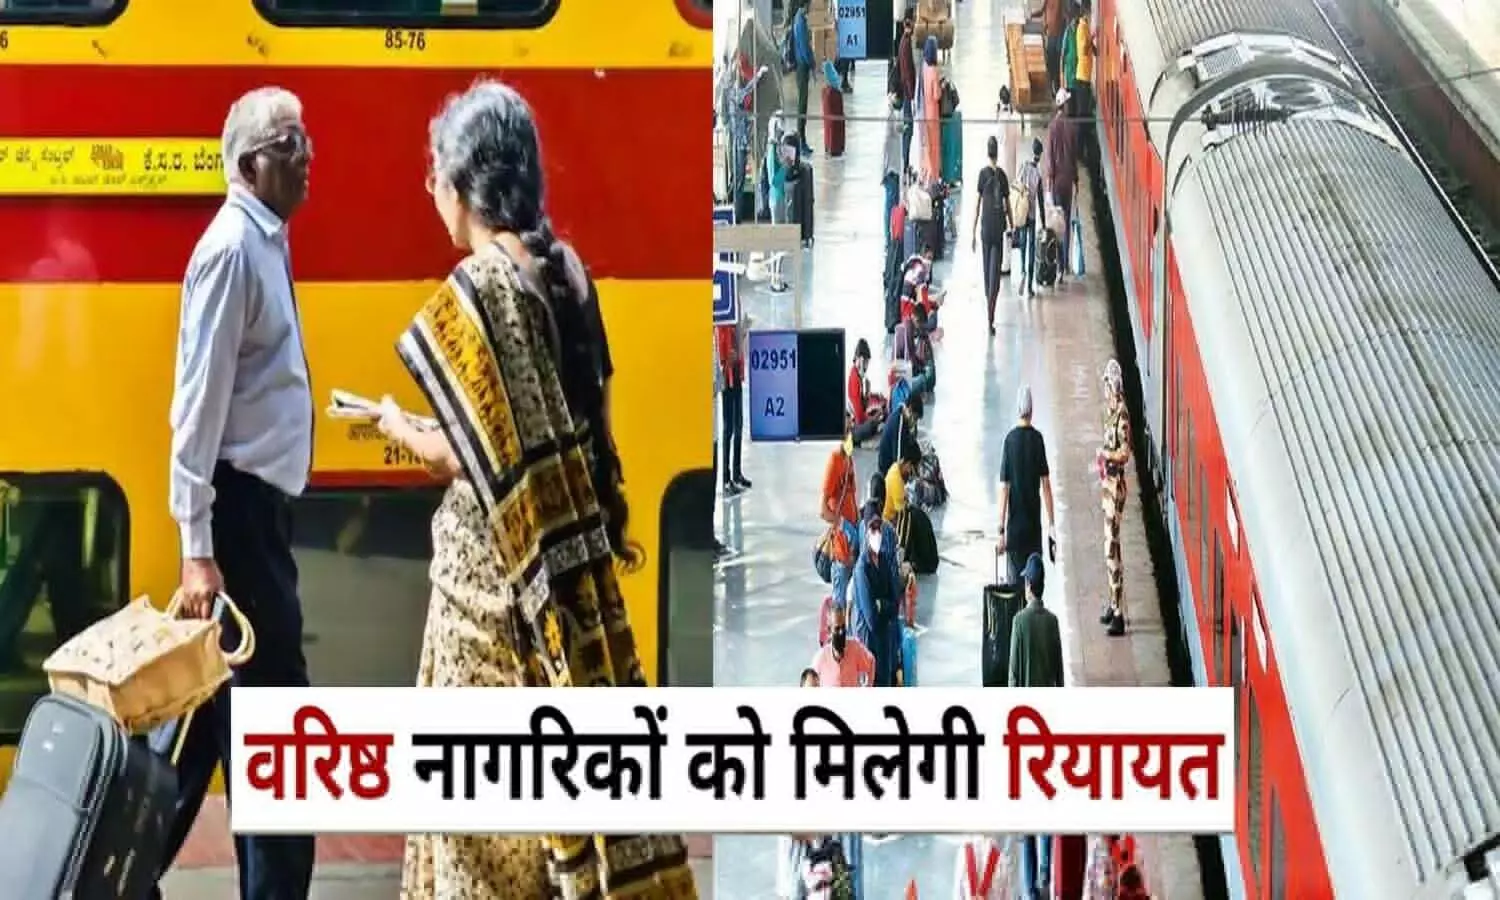 Senior Citizens will again get exemption in train tickets, Parliamentary committee recommended